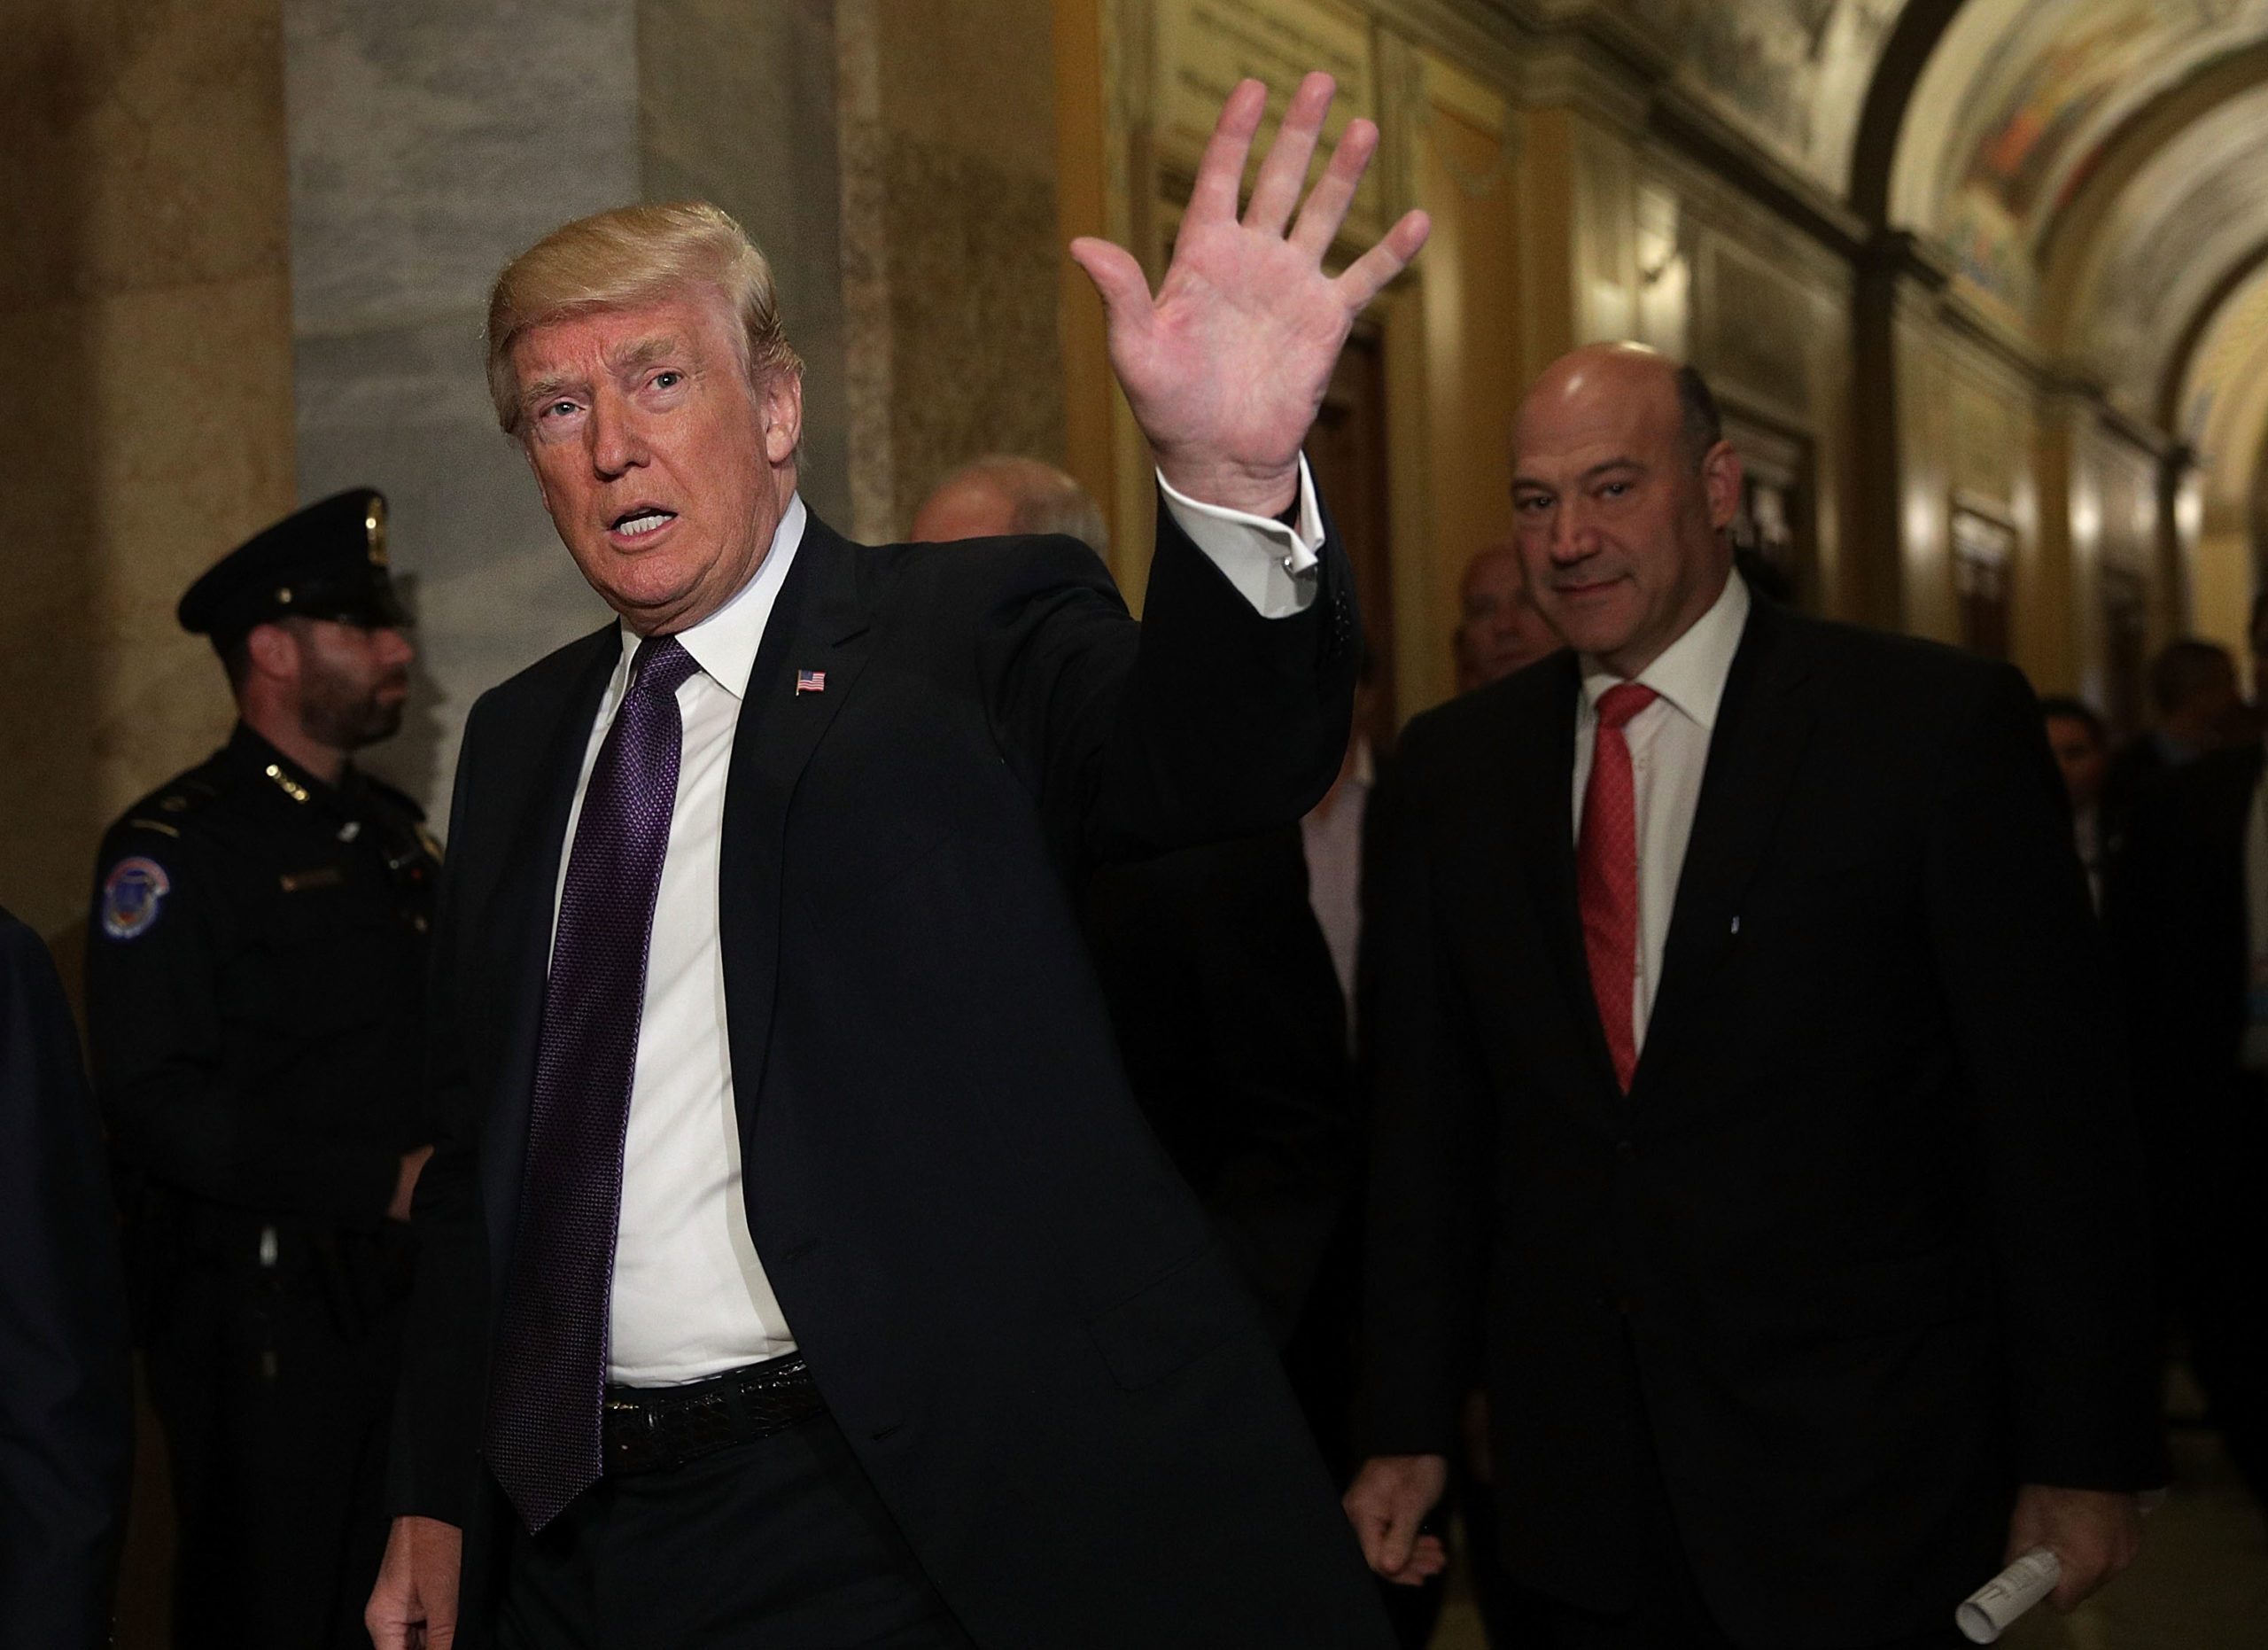 WASHINGTON, DC - NOVEMBER 16: U.S. President Donald Trump (L) waves as he arrives at the Capitol with Director of the National Economic Council Gary Cohn (R) for a House Republican Conference meeting November 16, 2017 in Washington, DC. President Trump travels to Capitol Hill to discuss the tax reform bill as the House prepare to vote on the bill today. (Photo by Alex Wong/Getty Images)